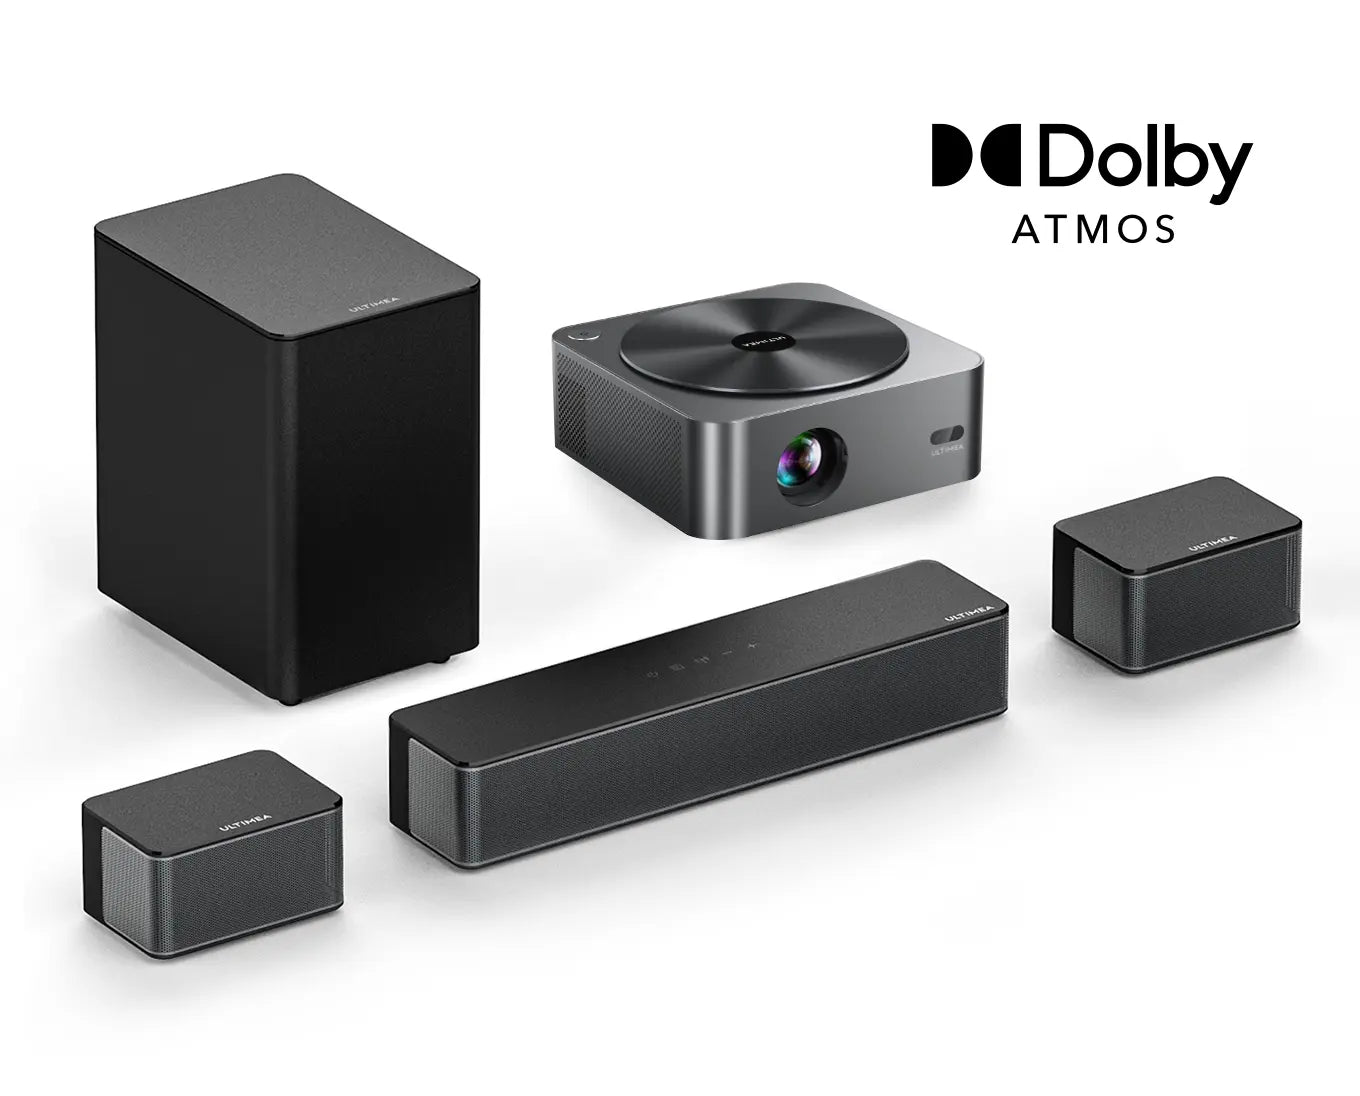 ULTIMEA Dolby Atmos Home Theater System | 5.1 Surround Sound with 